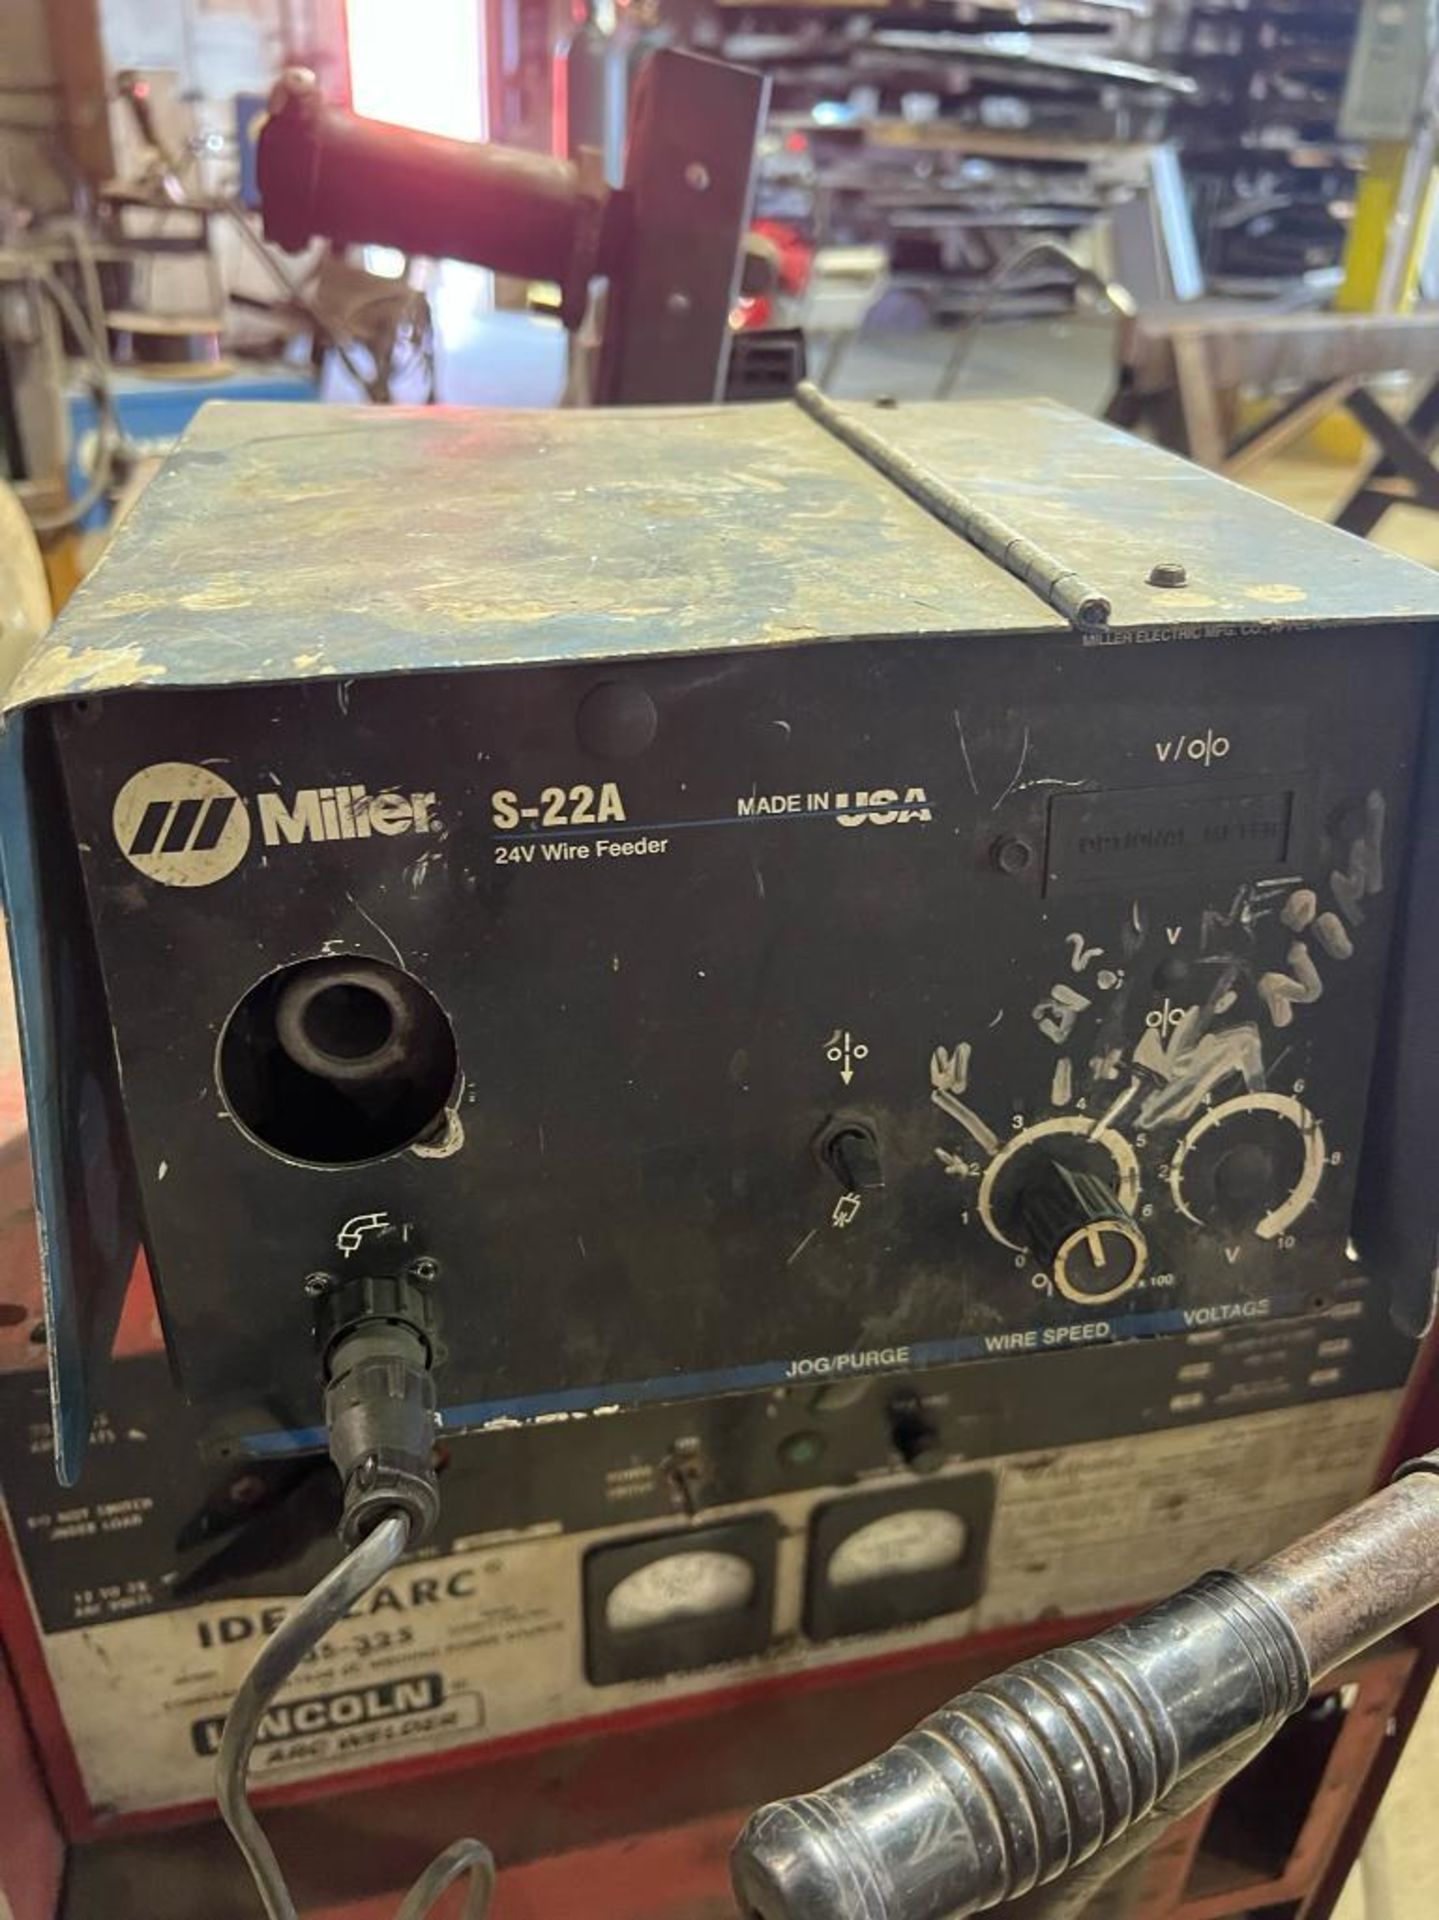 Lincoln Arc Welder, Model R35-3LS, Sold With Miller S-22A 24V Wire Feeder - Image 3 of 5